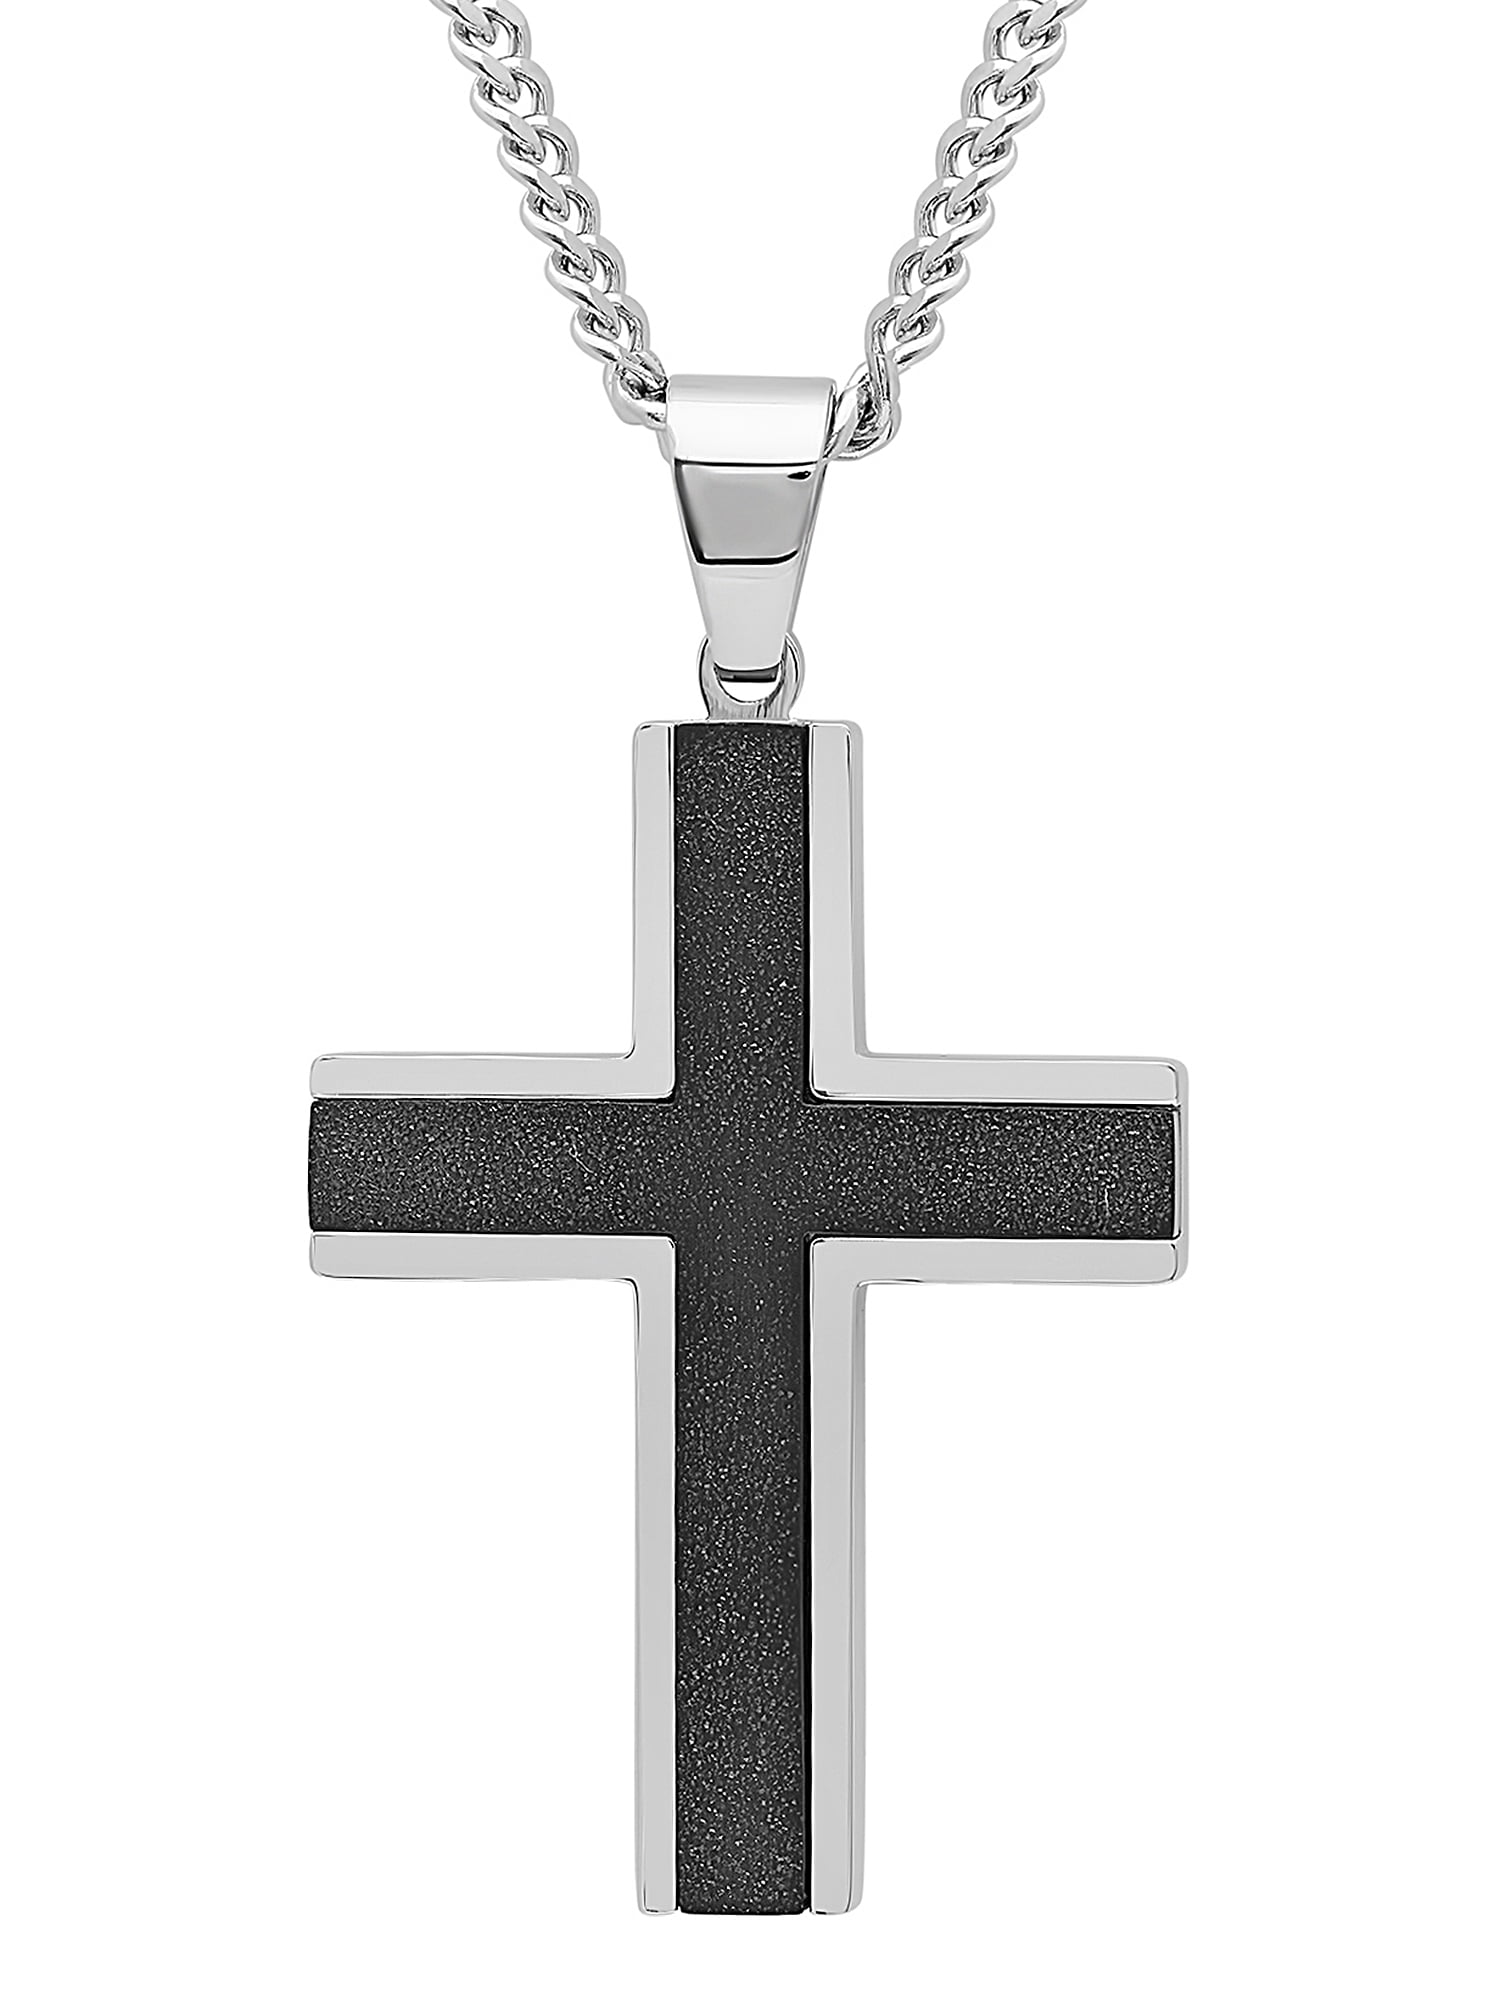 Fashion Unisex Cross Stainless steel Jewelry Pendant Chain Necklace Party Gifts 